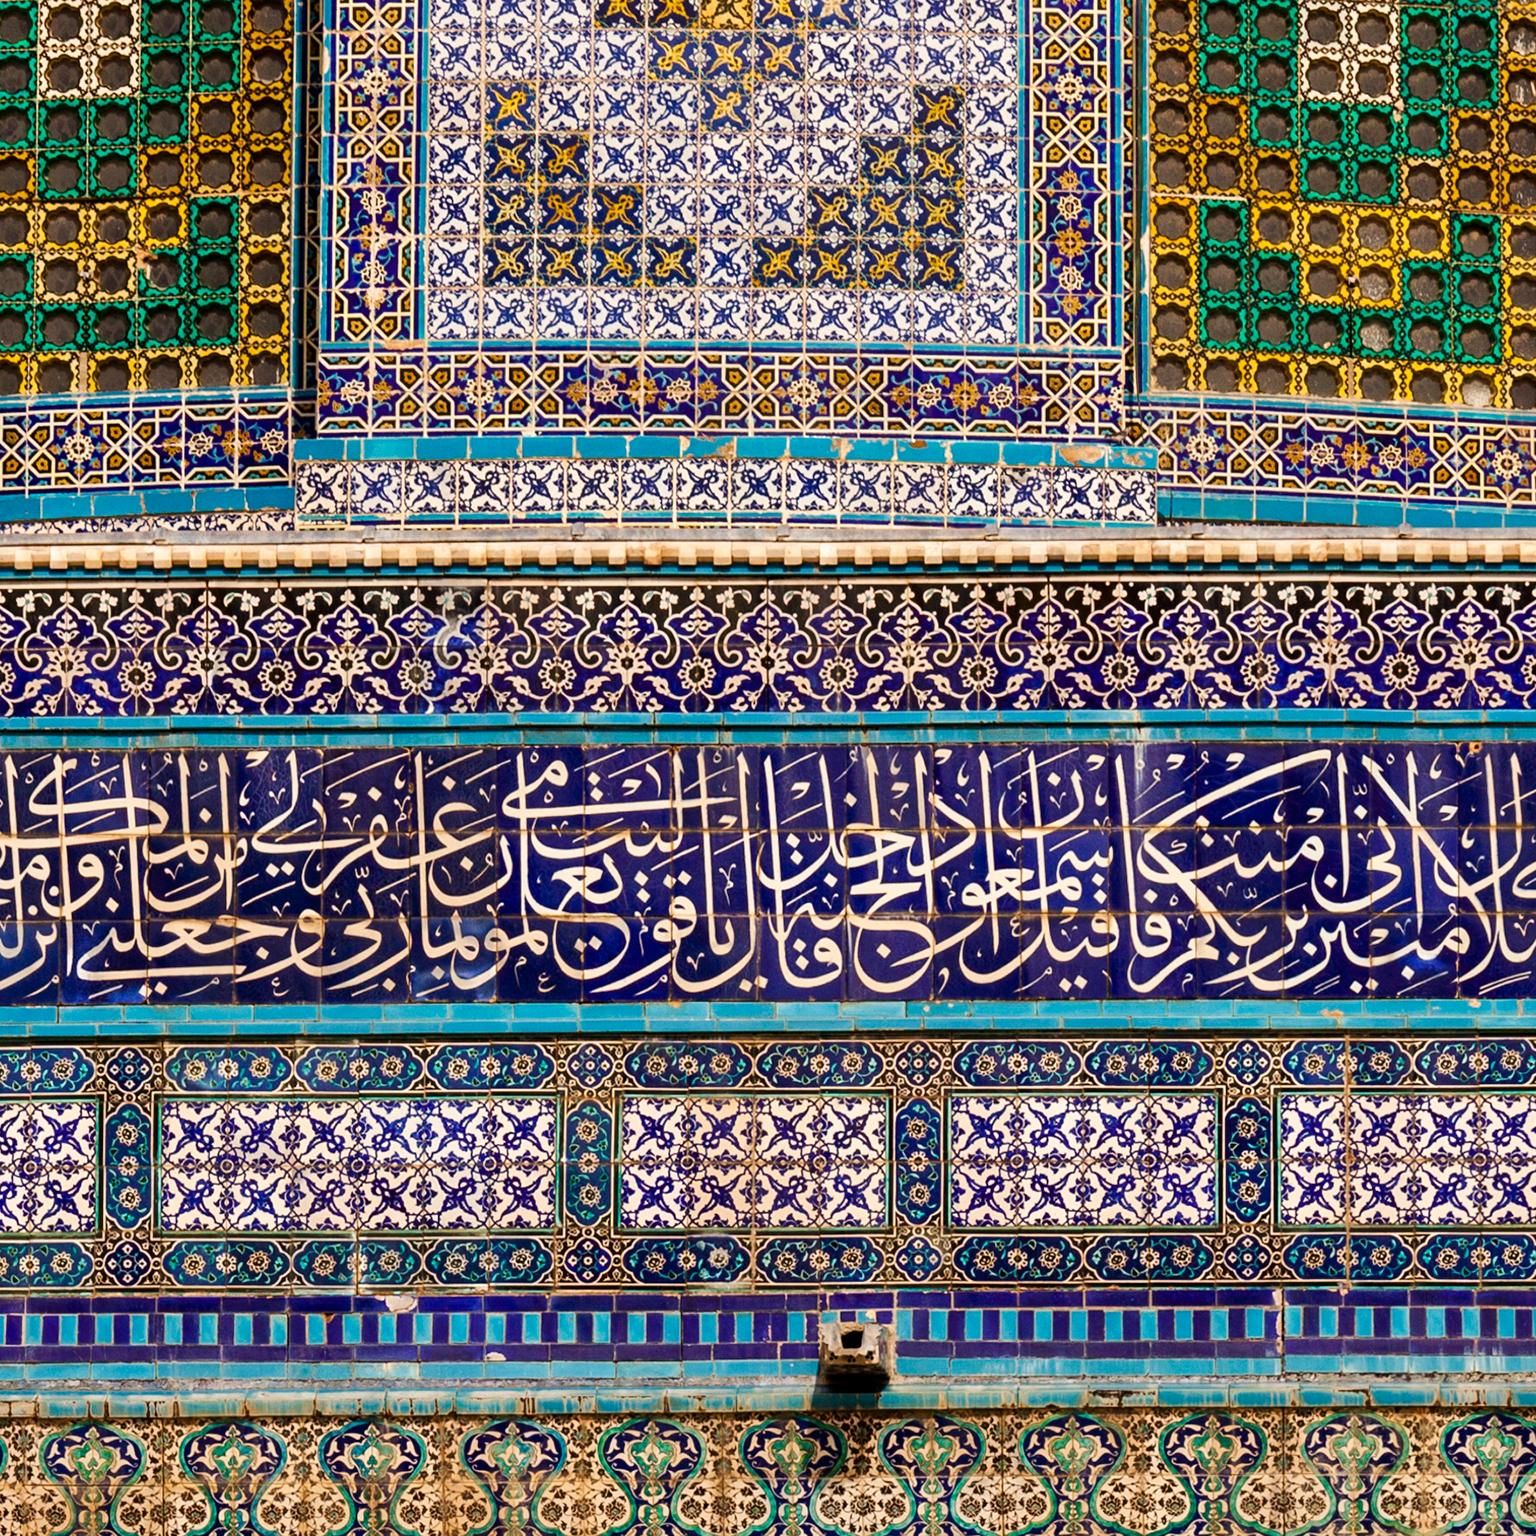 Dome of the Rock Mosque Exterior, Israel, Jerusalem, 2012
Photograph by Cosmo Condina. Geometric patterns and Arabic calligraphy, Jerusalem, Israel, 2012

Archival pigment print 19 X 12.6 in. Edition of 10. This is # 3/10 in the edition.

A colour